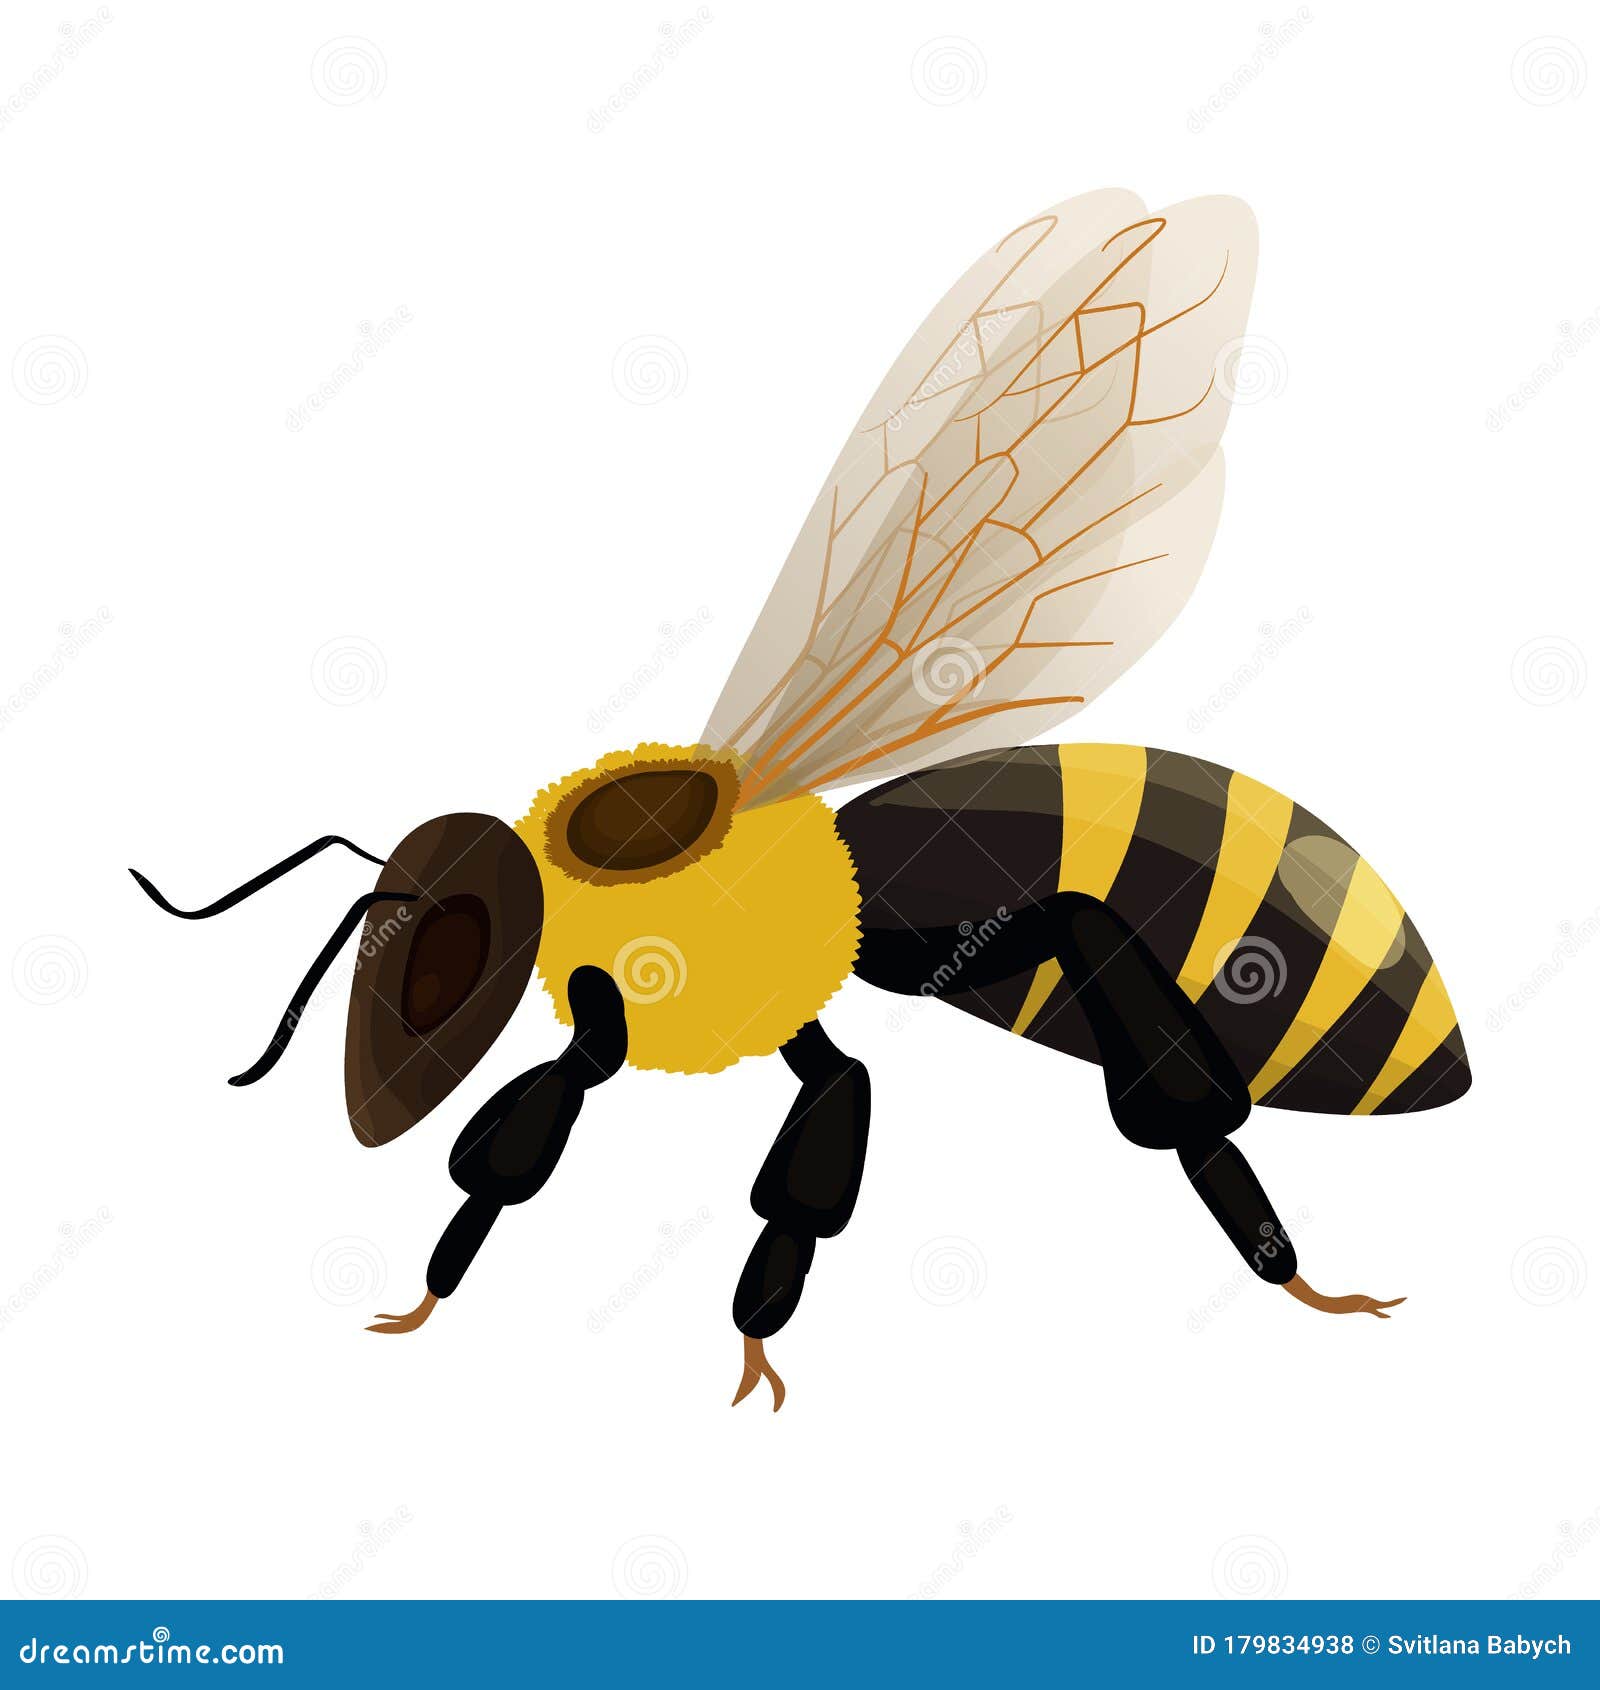 Honey Bee Vector  Vector Icon Isolated on White Background Honey  Bee. Stock Vector - Illustration of insect, painted: 179834938